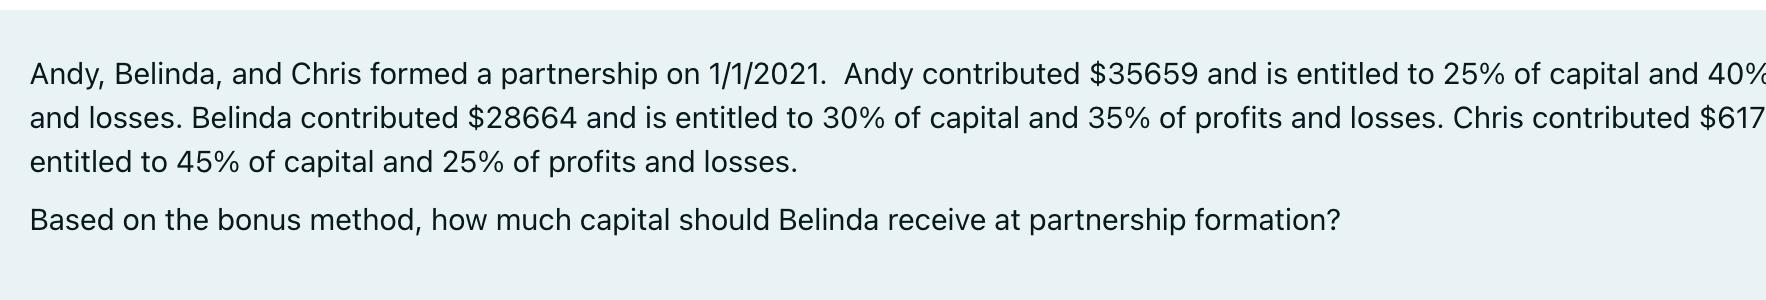 Andy, Belinda, and Chris formed a partnership on 1/1/2021. Andy contributed $35659 and is entitled to 25% of capital and 40%